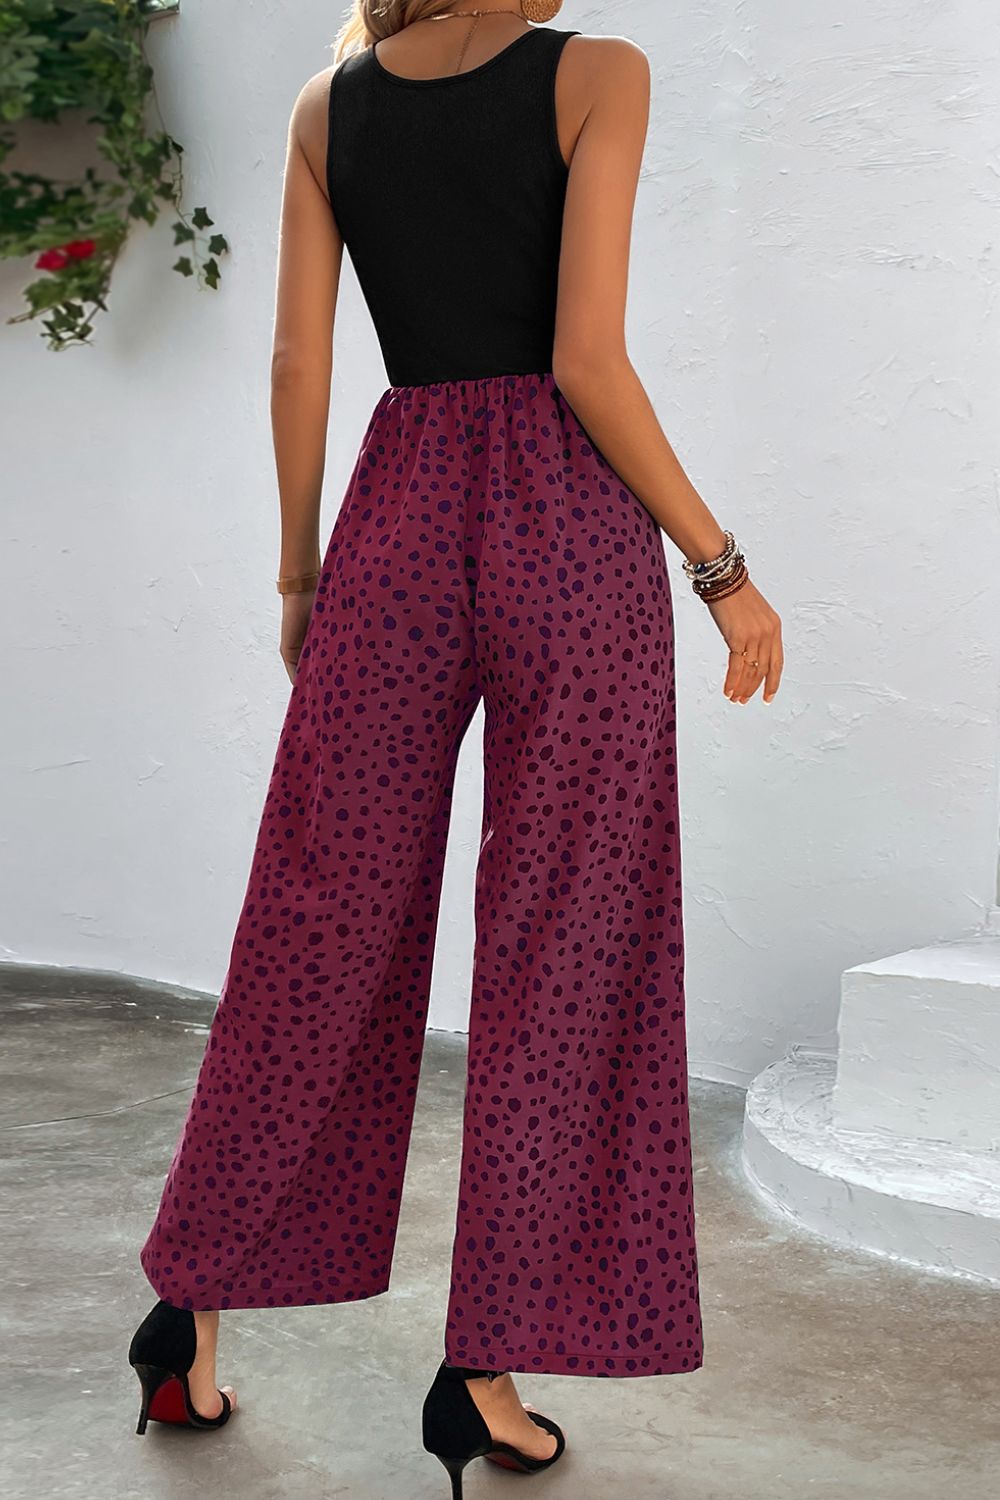 Leopard Lovin' Jumpsuit - Unleash Your Inner Wild Child and Embrace Sensual Elegance - Feel Confident, Daring and Irresistibly Alluring. - Guy Christopher